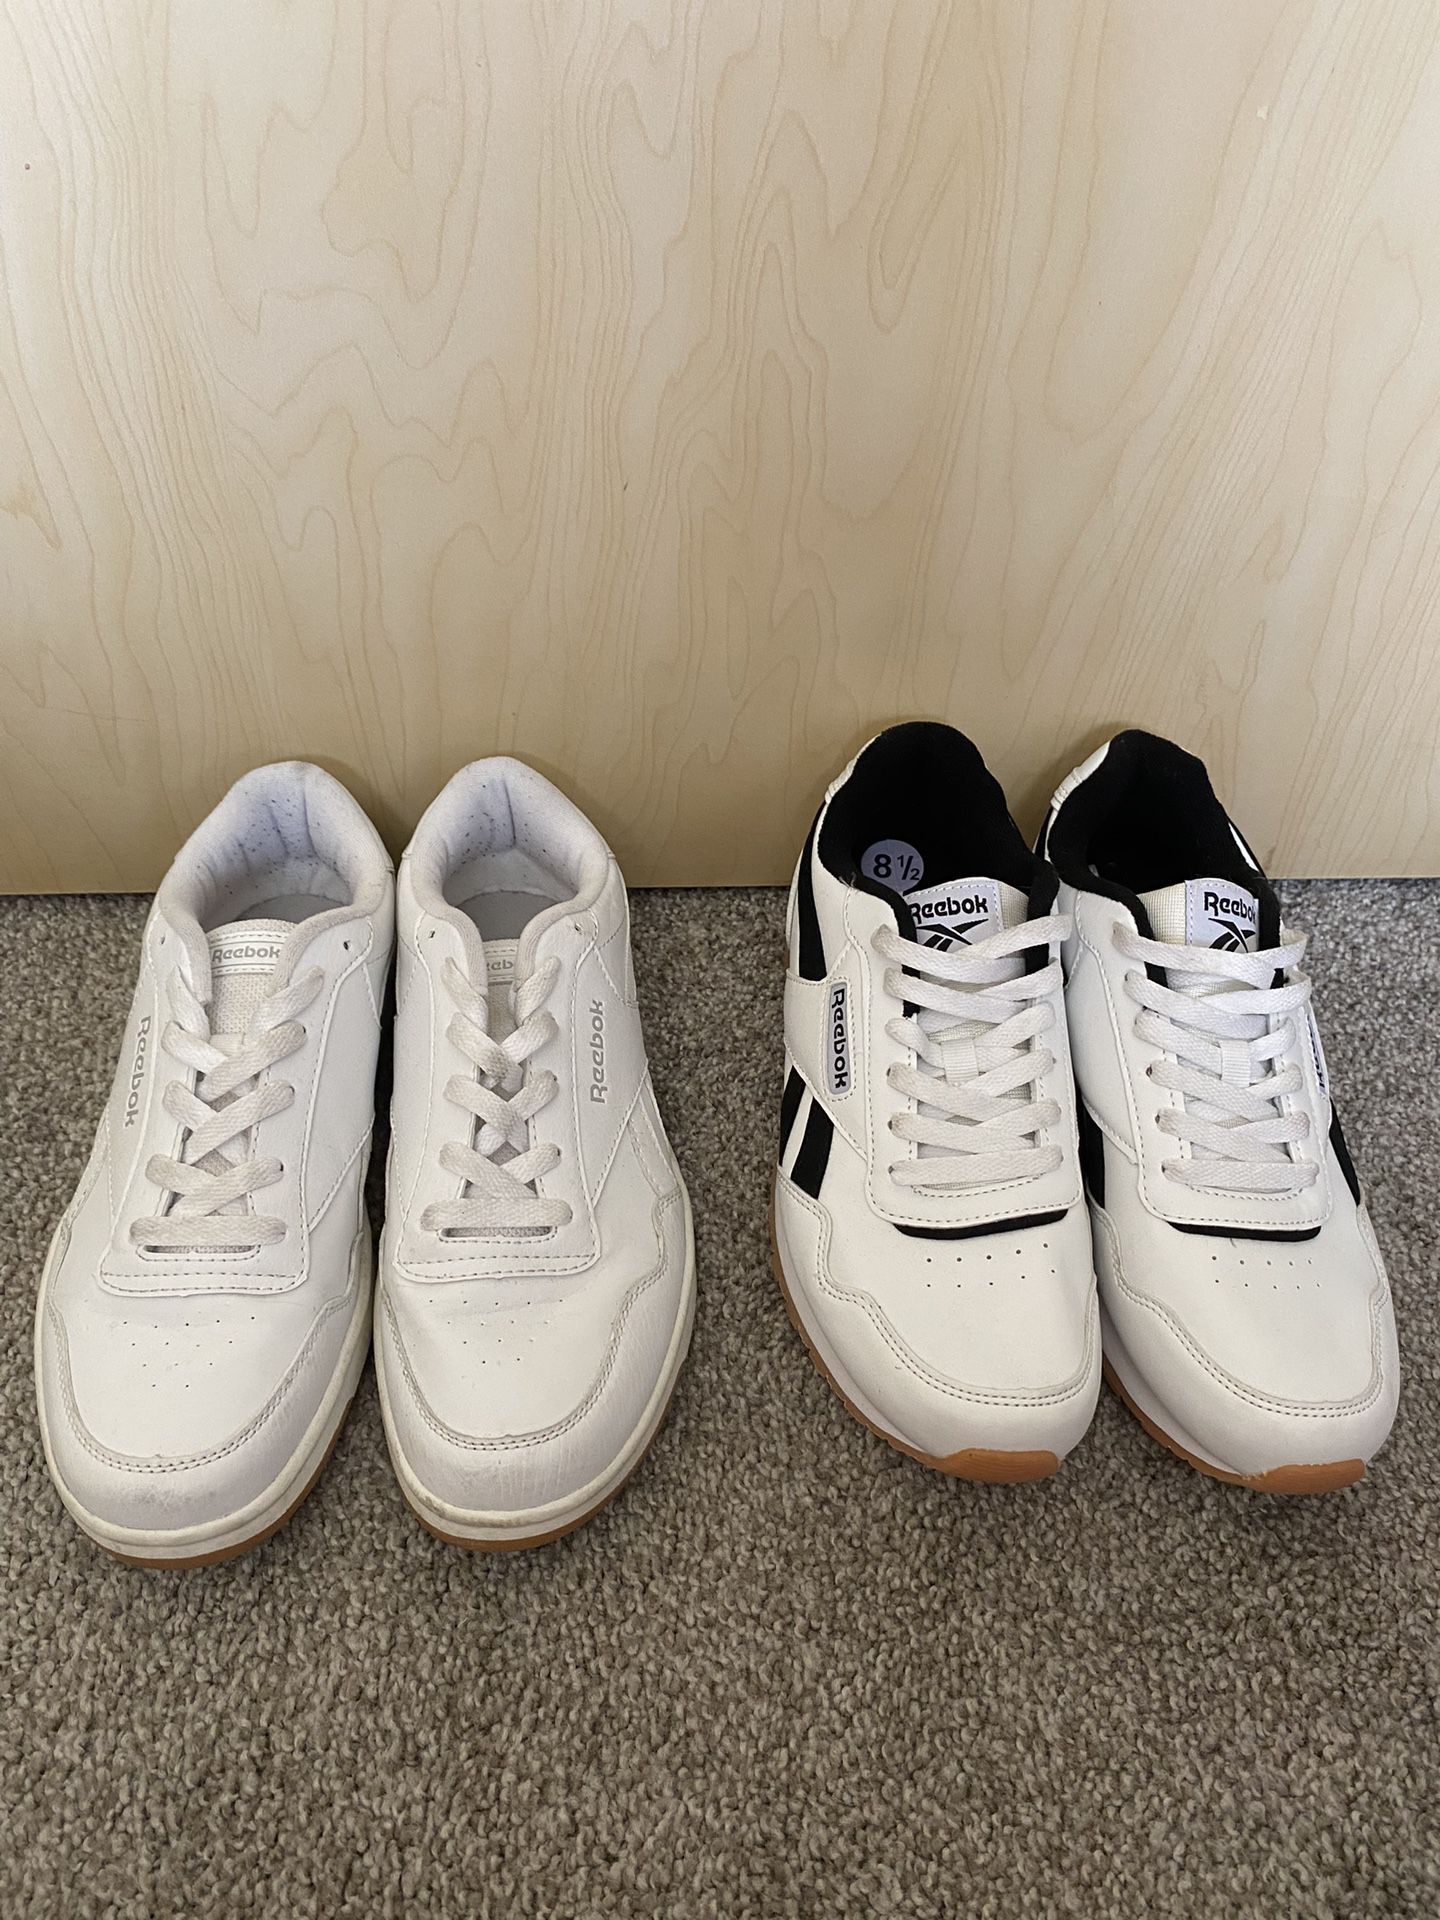 Reebok sneakers for men The white ones were used very little size 7 and the white and blue ones are brand new size 8 1/2 